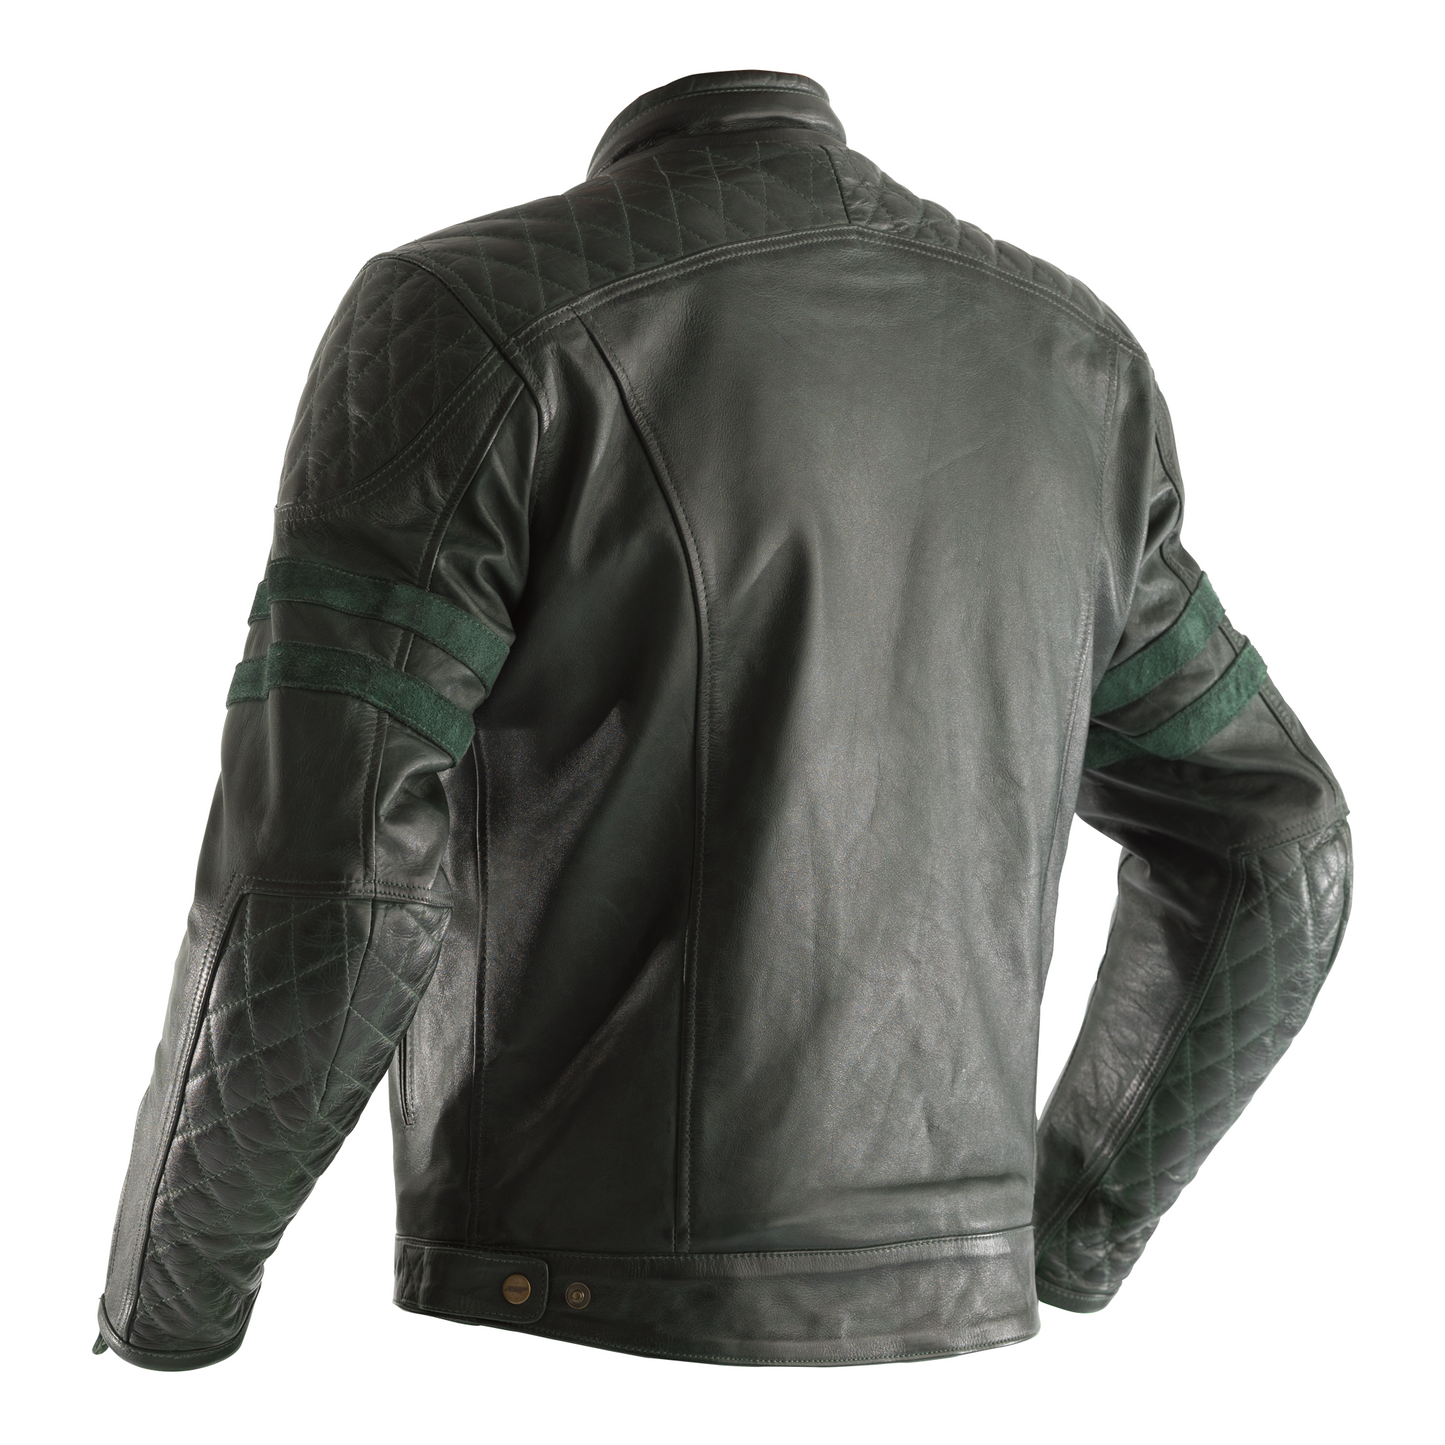 RST IOM TT Hillberry Leather Riding Jacket - CE APPROVED - Green